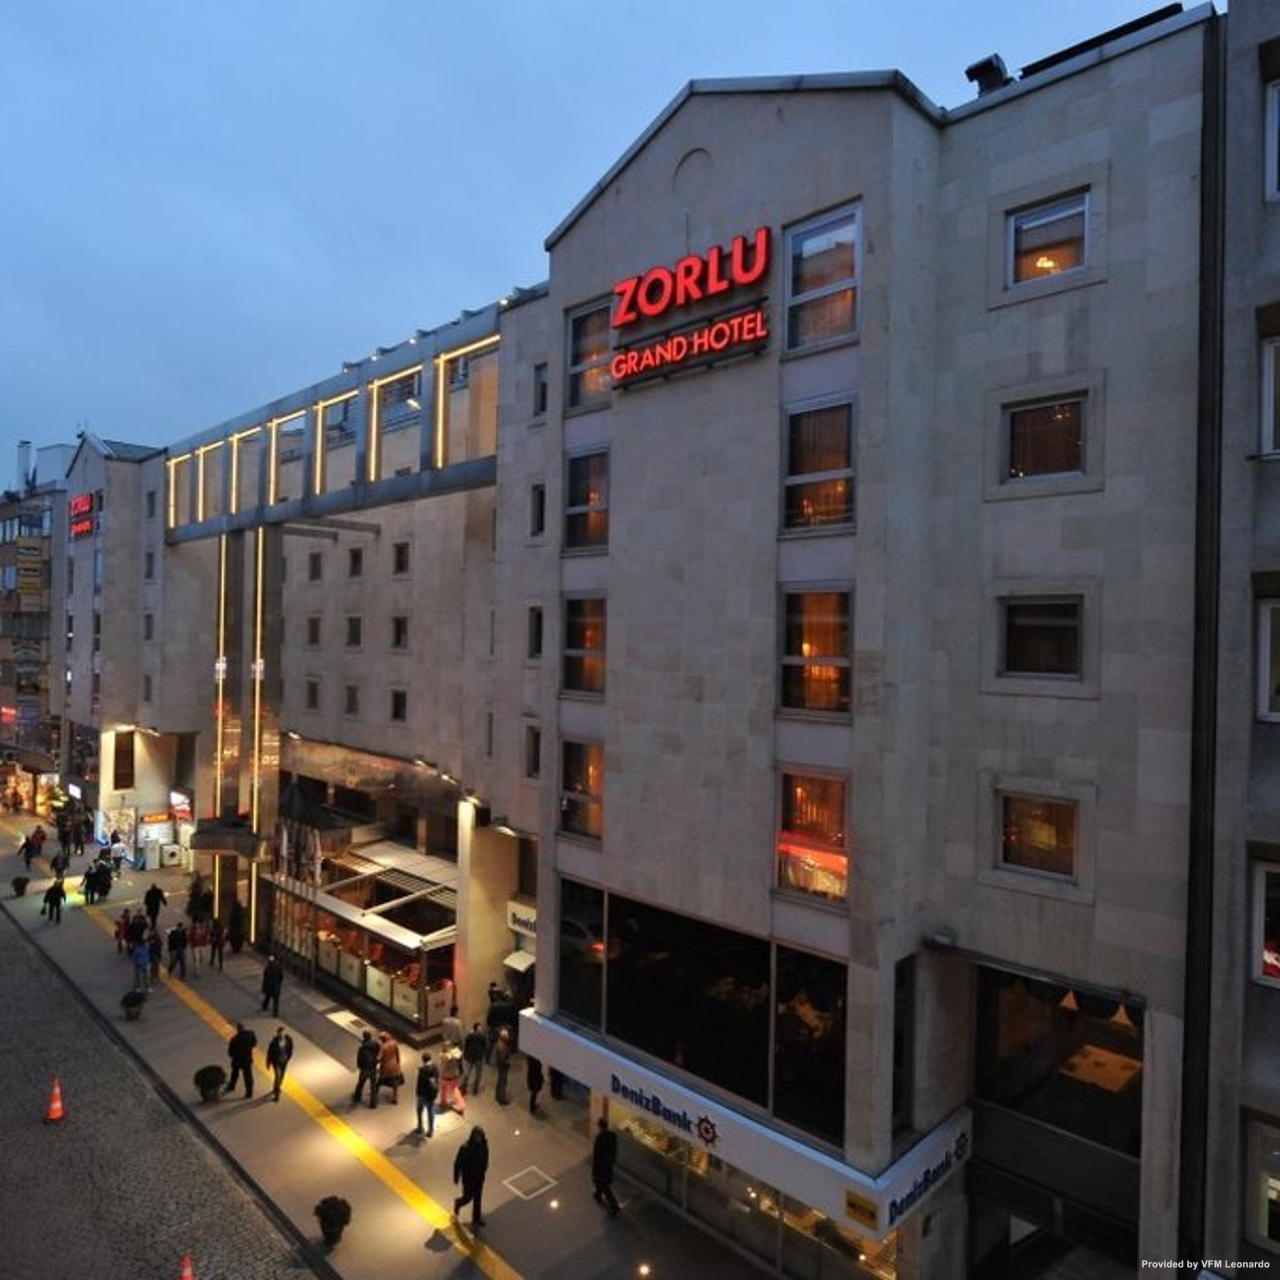 zorlu grand hotel trabzon turkey at hrs with free services